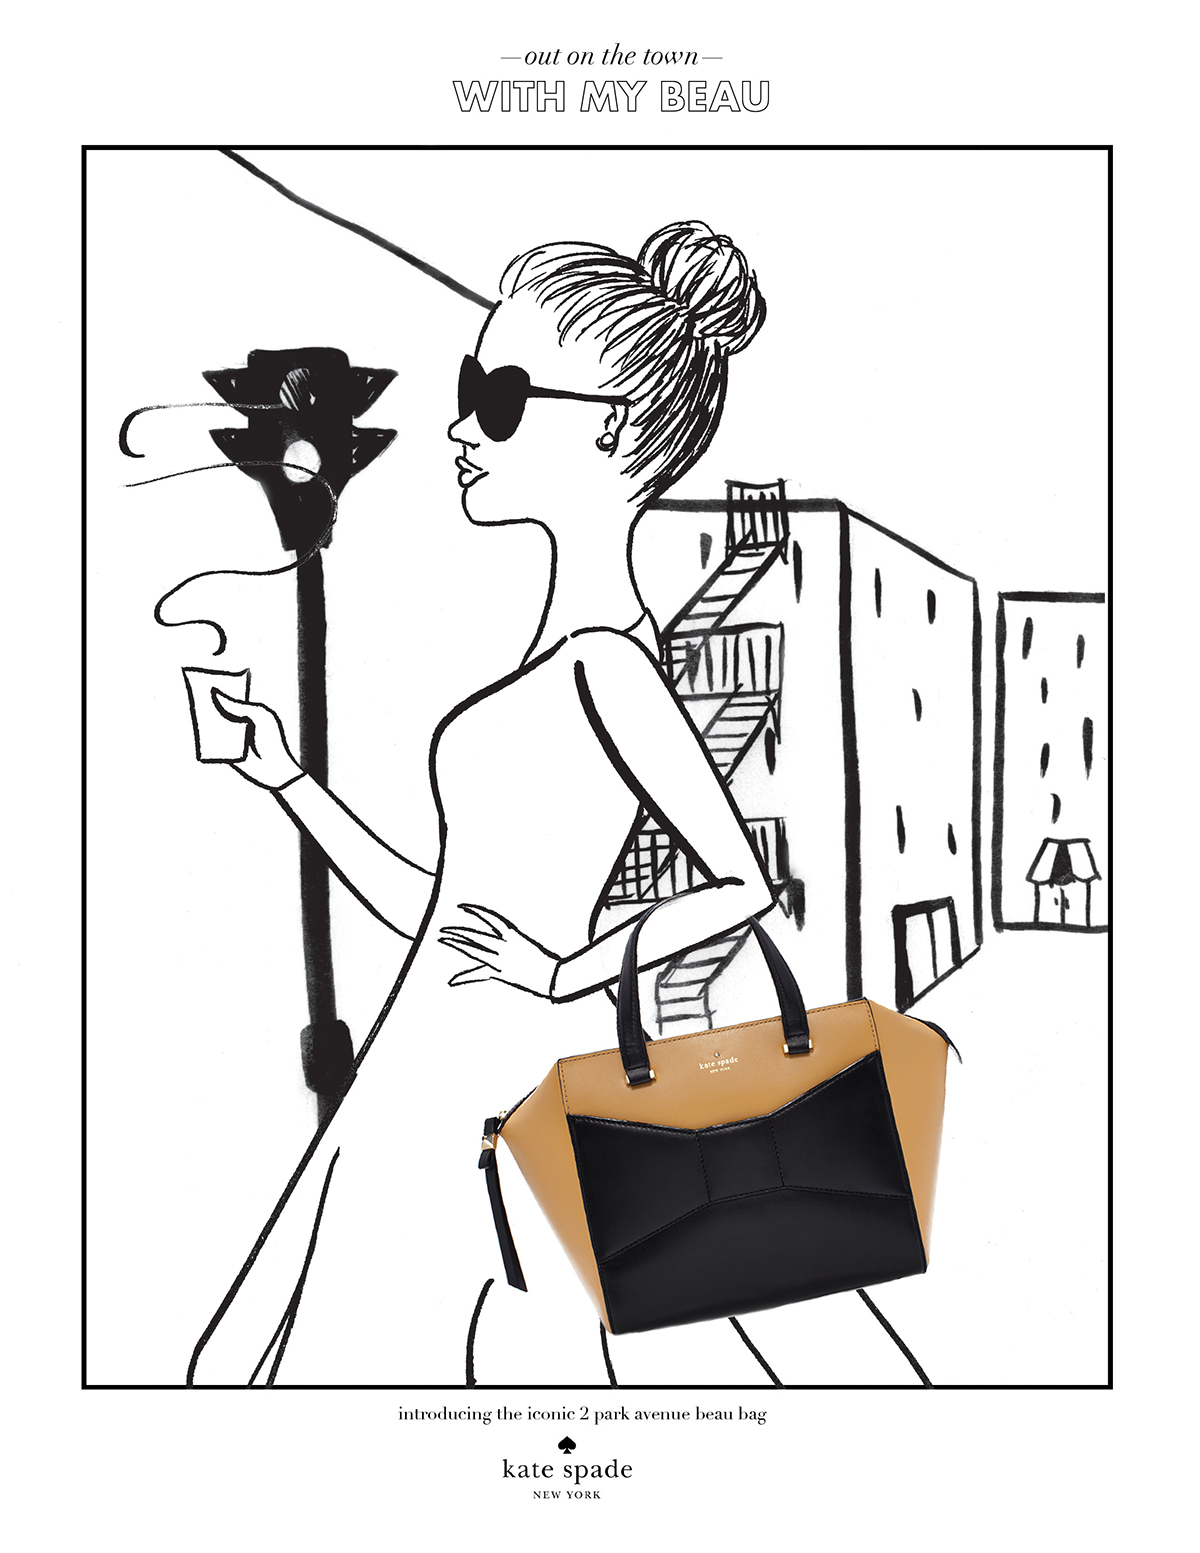 Kate Spade New York Magazine Ad Fashion Ad Beau bow Perspective KSNY sketch Composite